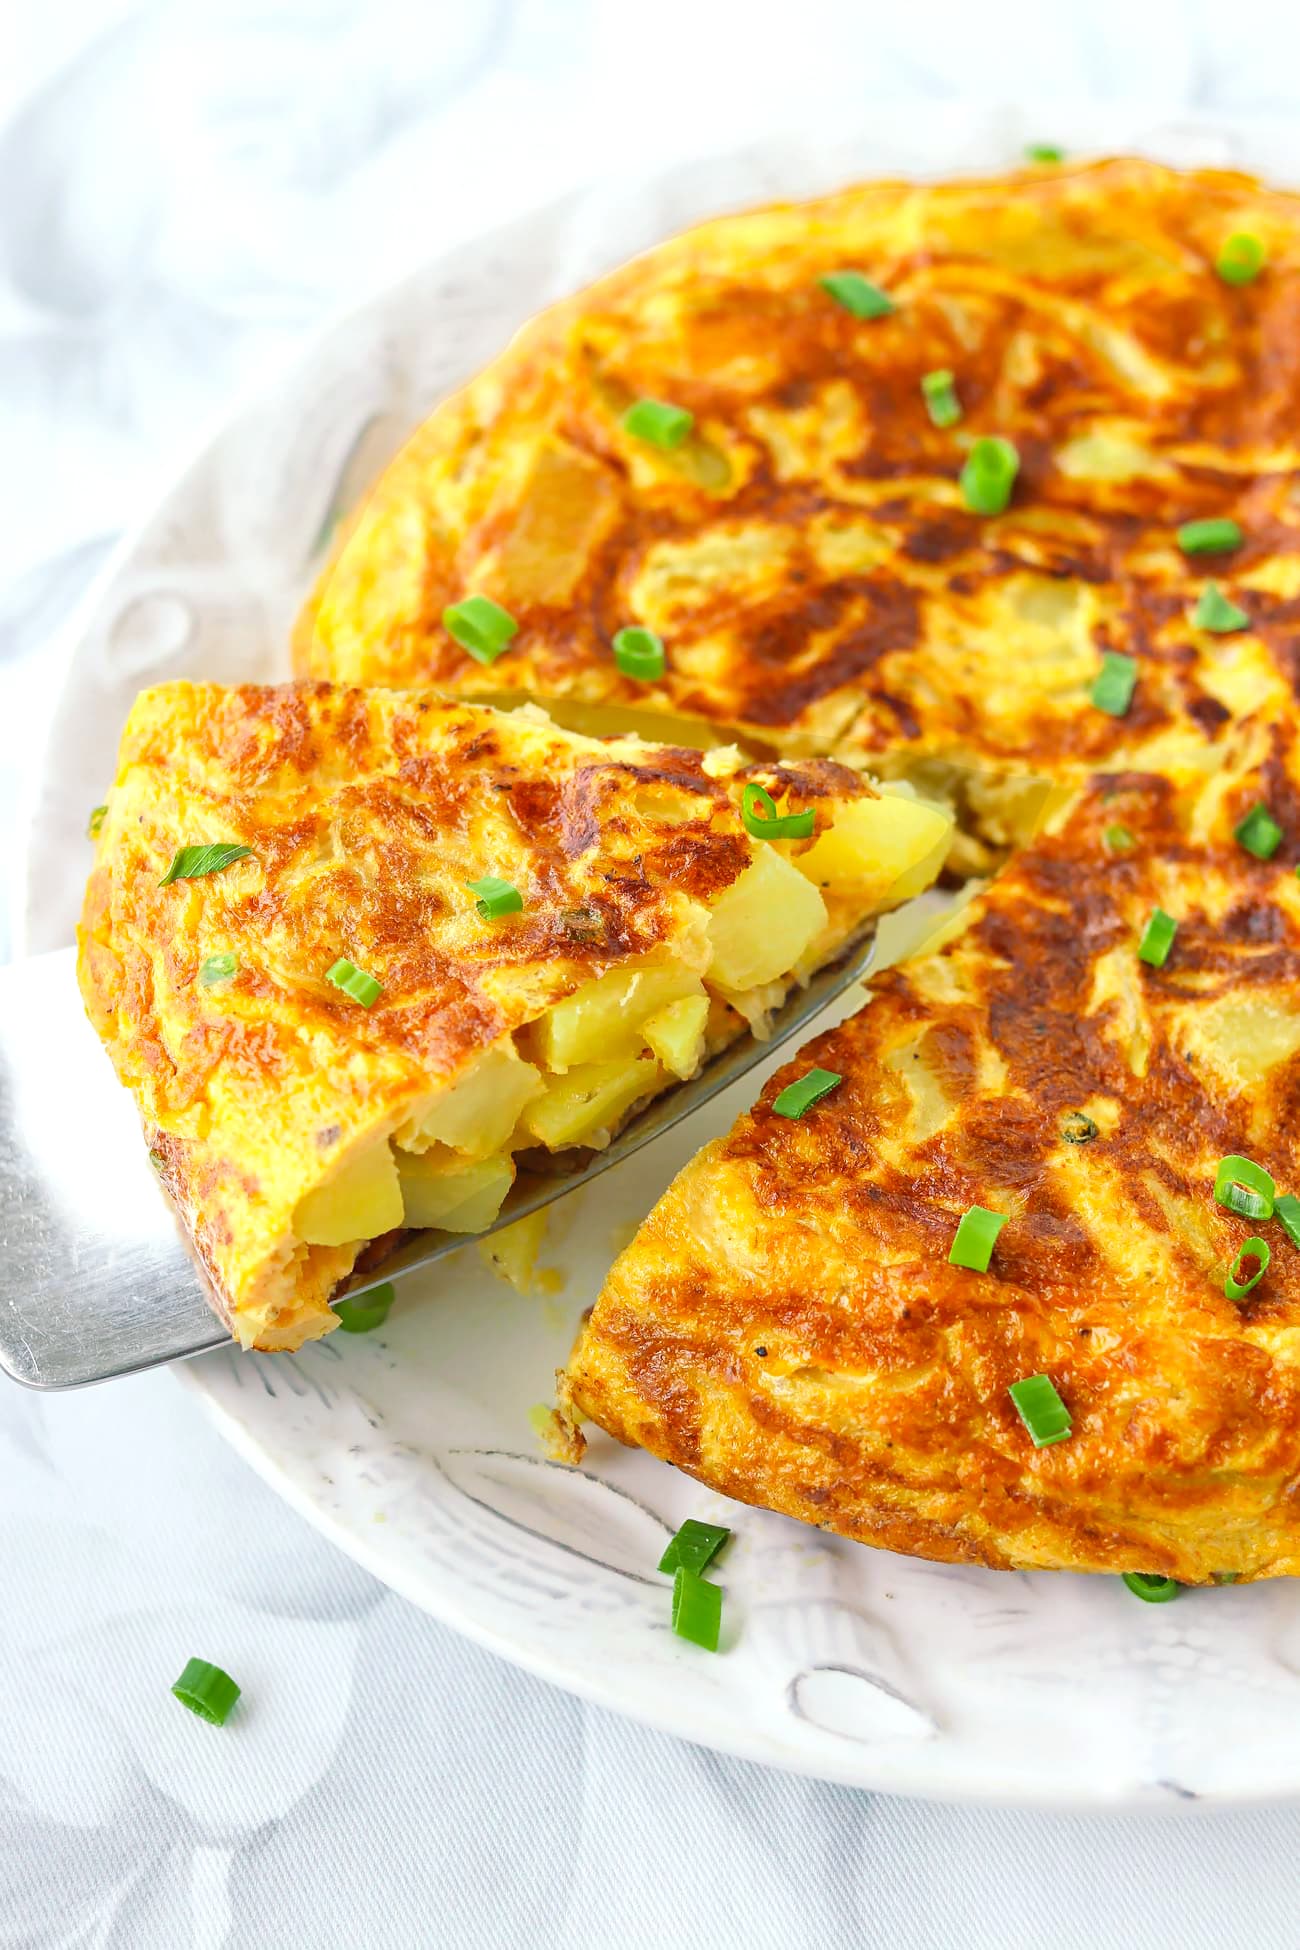 Spanish Omelette (Tortilla Española) | That Spicy Chick